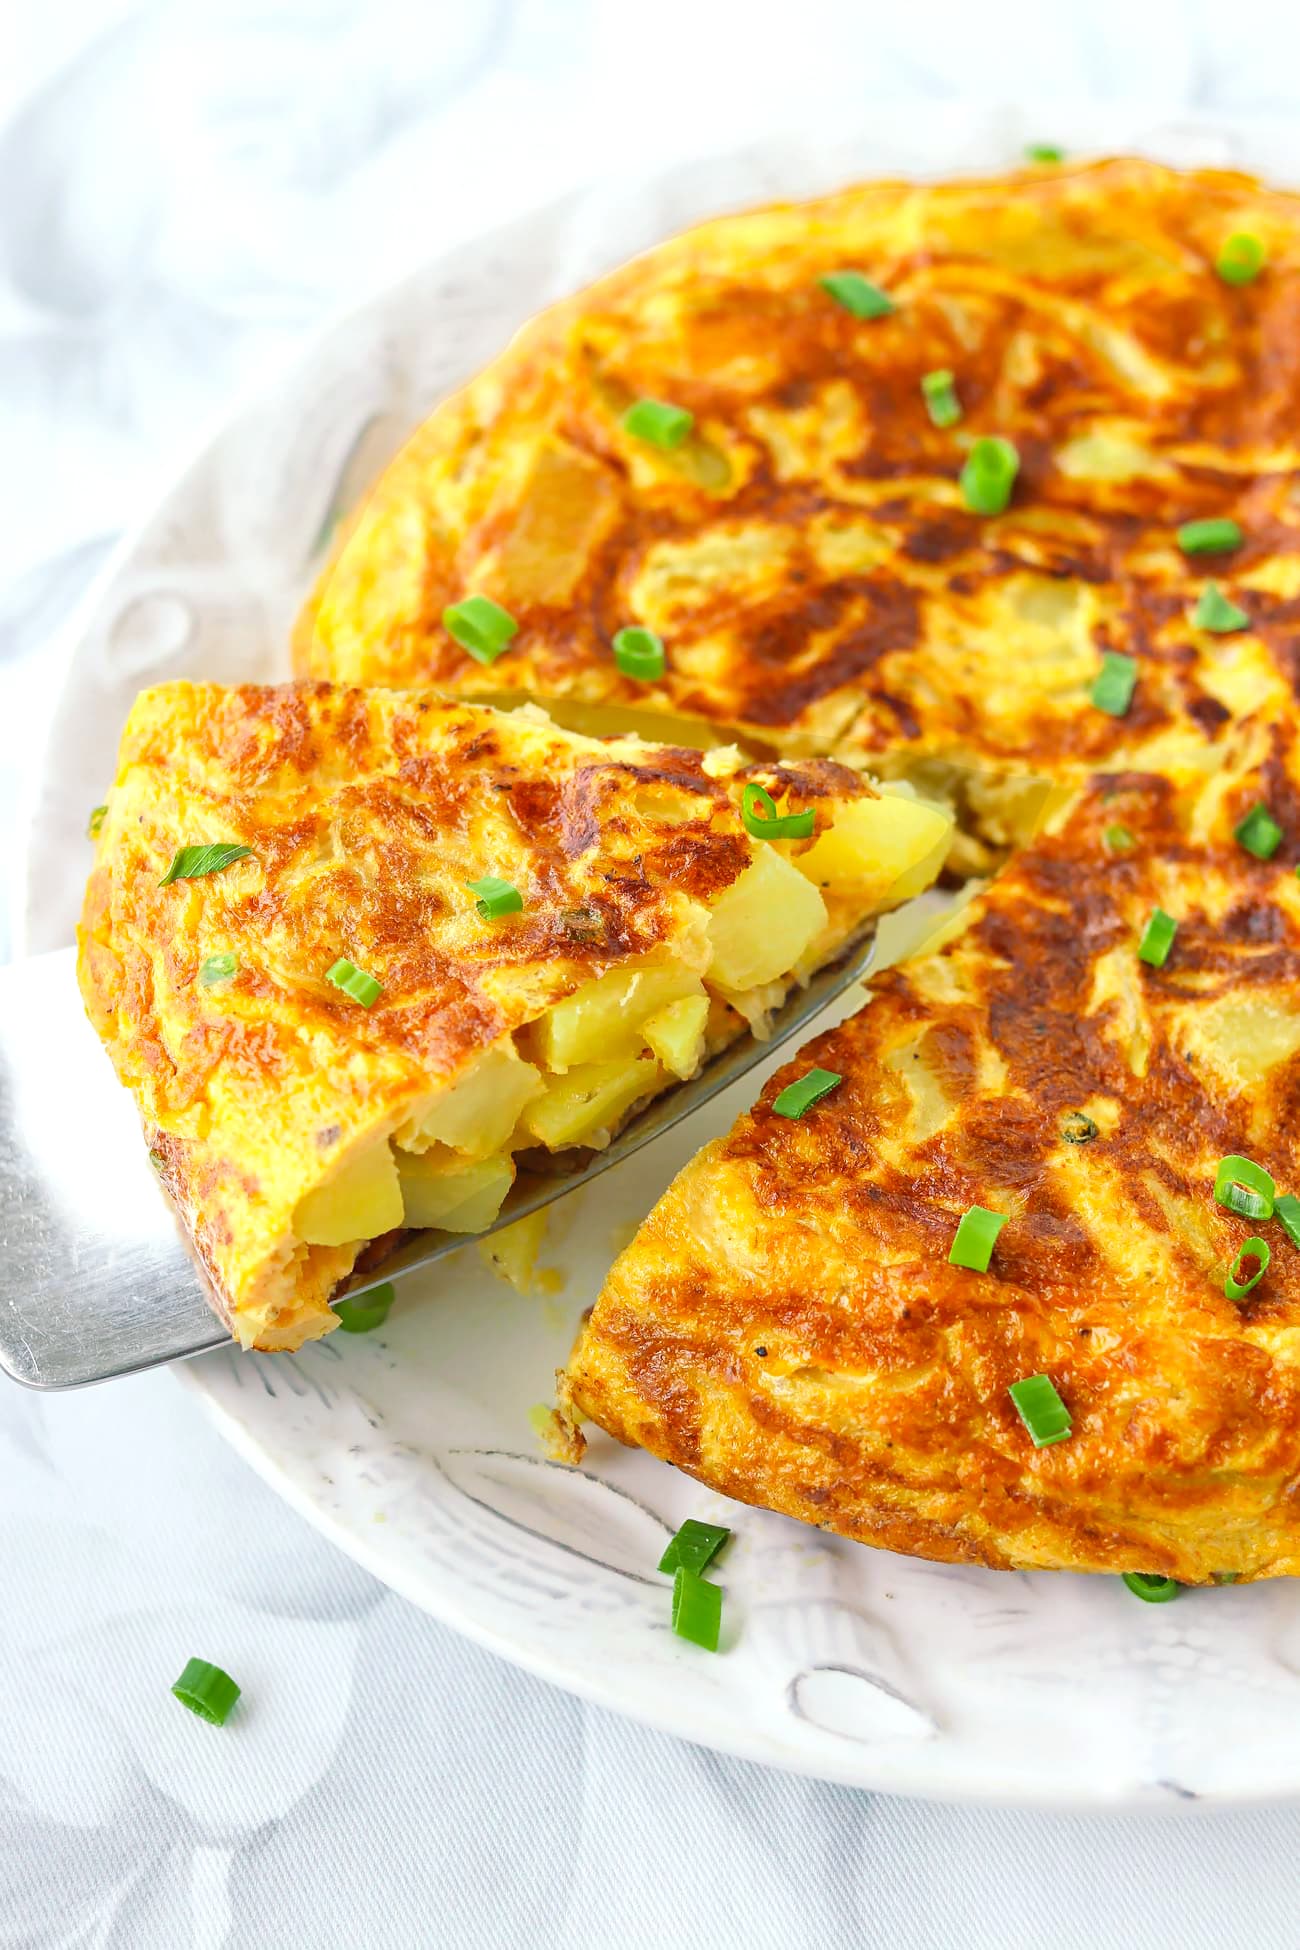 Spanish Omelette (Tortilla Española) | That Spicy Chick